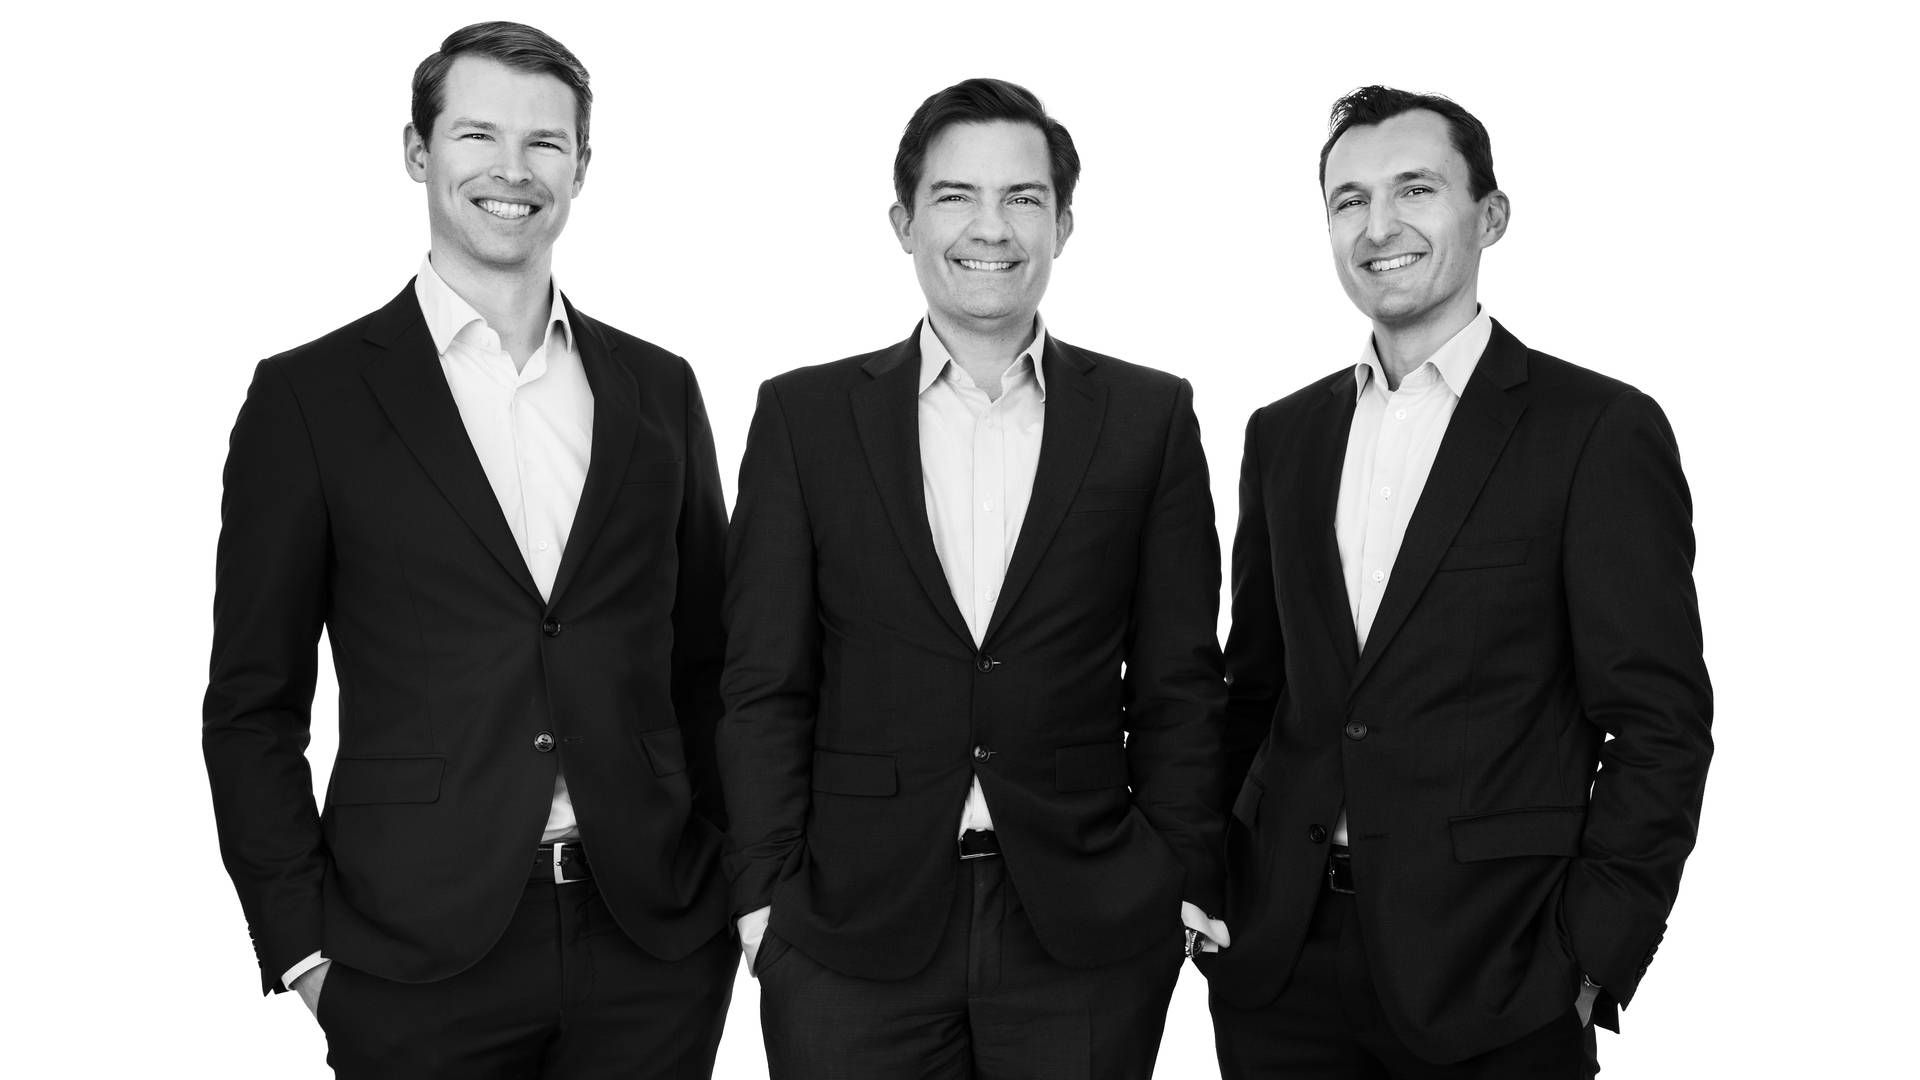 Christen Estrup, Julien Marencic and Alexander Reventlow announcing the start of Jera Capital two months after leaving Nordea AM was a very popular people story in 2022. | Photo: PR / Jera Capital